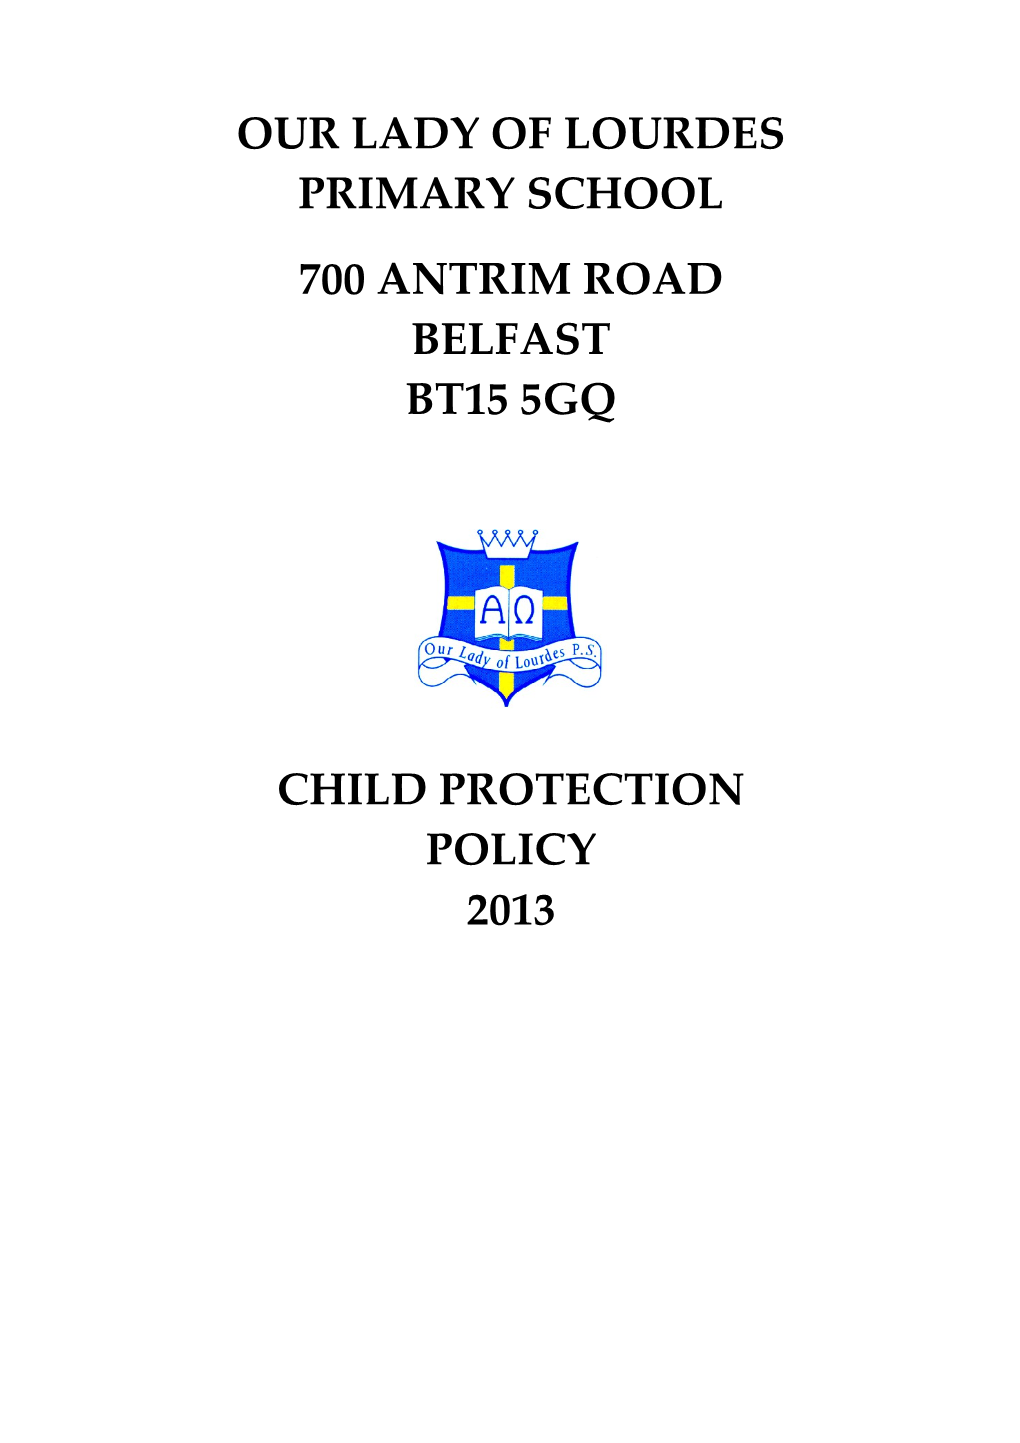 Revised Child Protection Policy